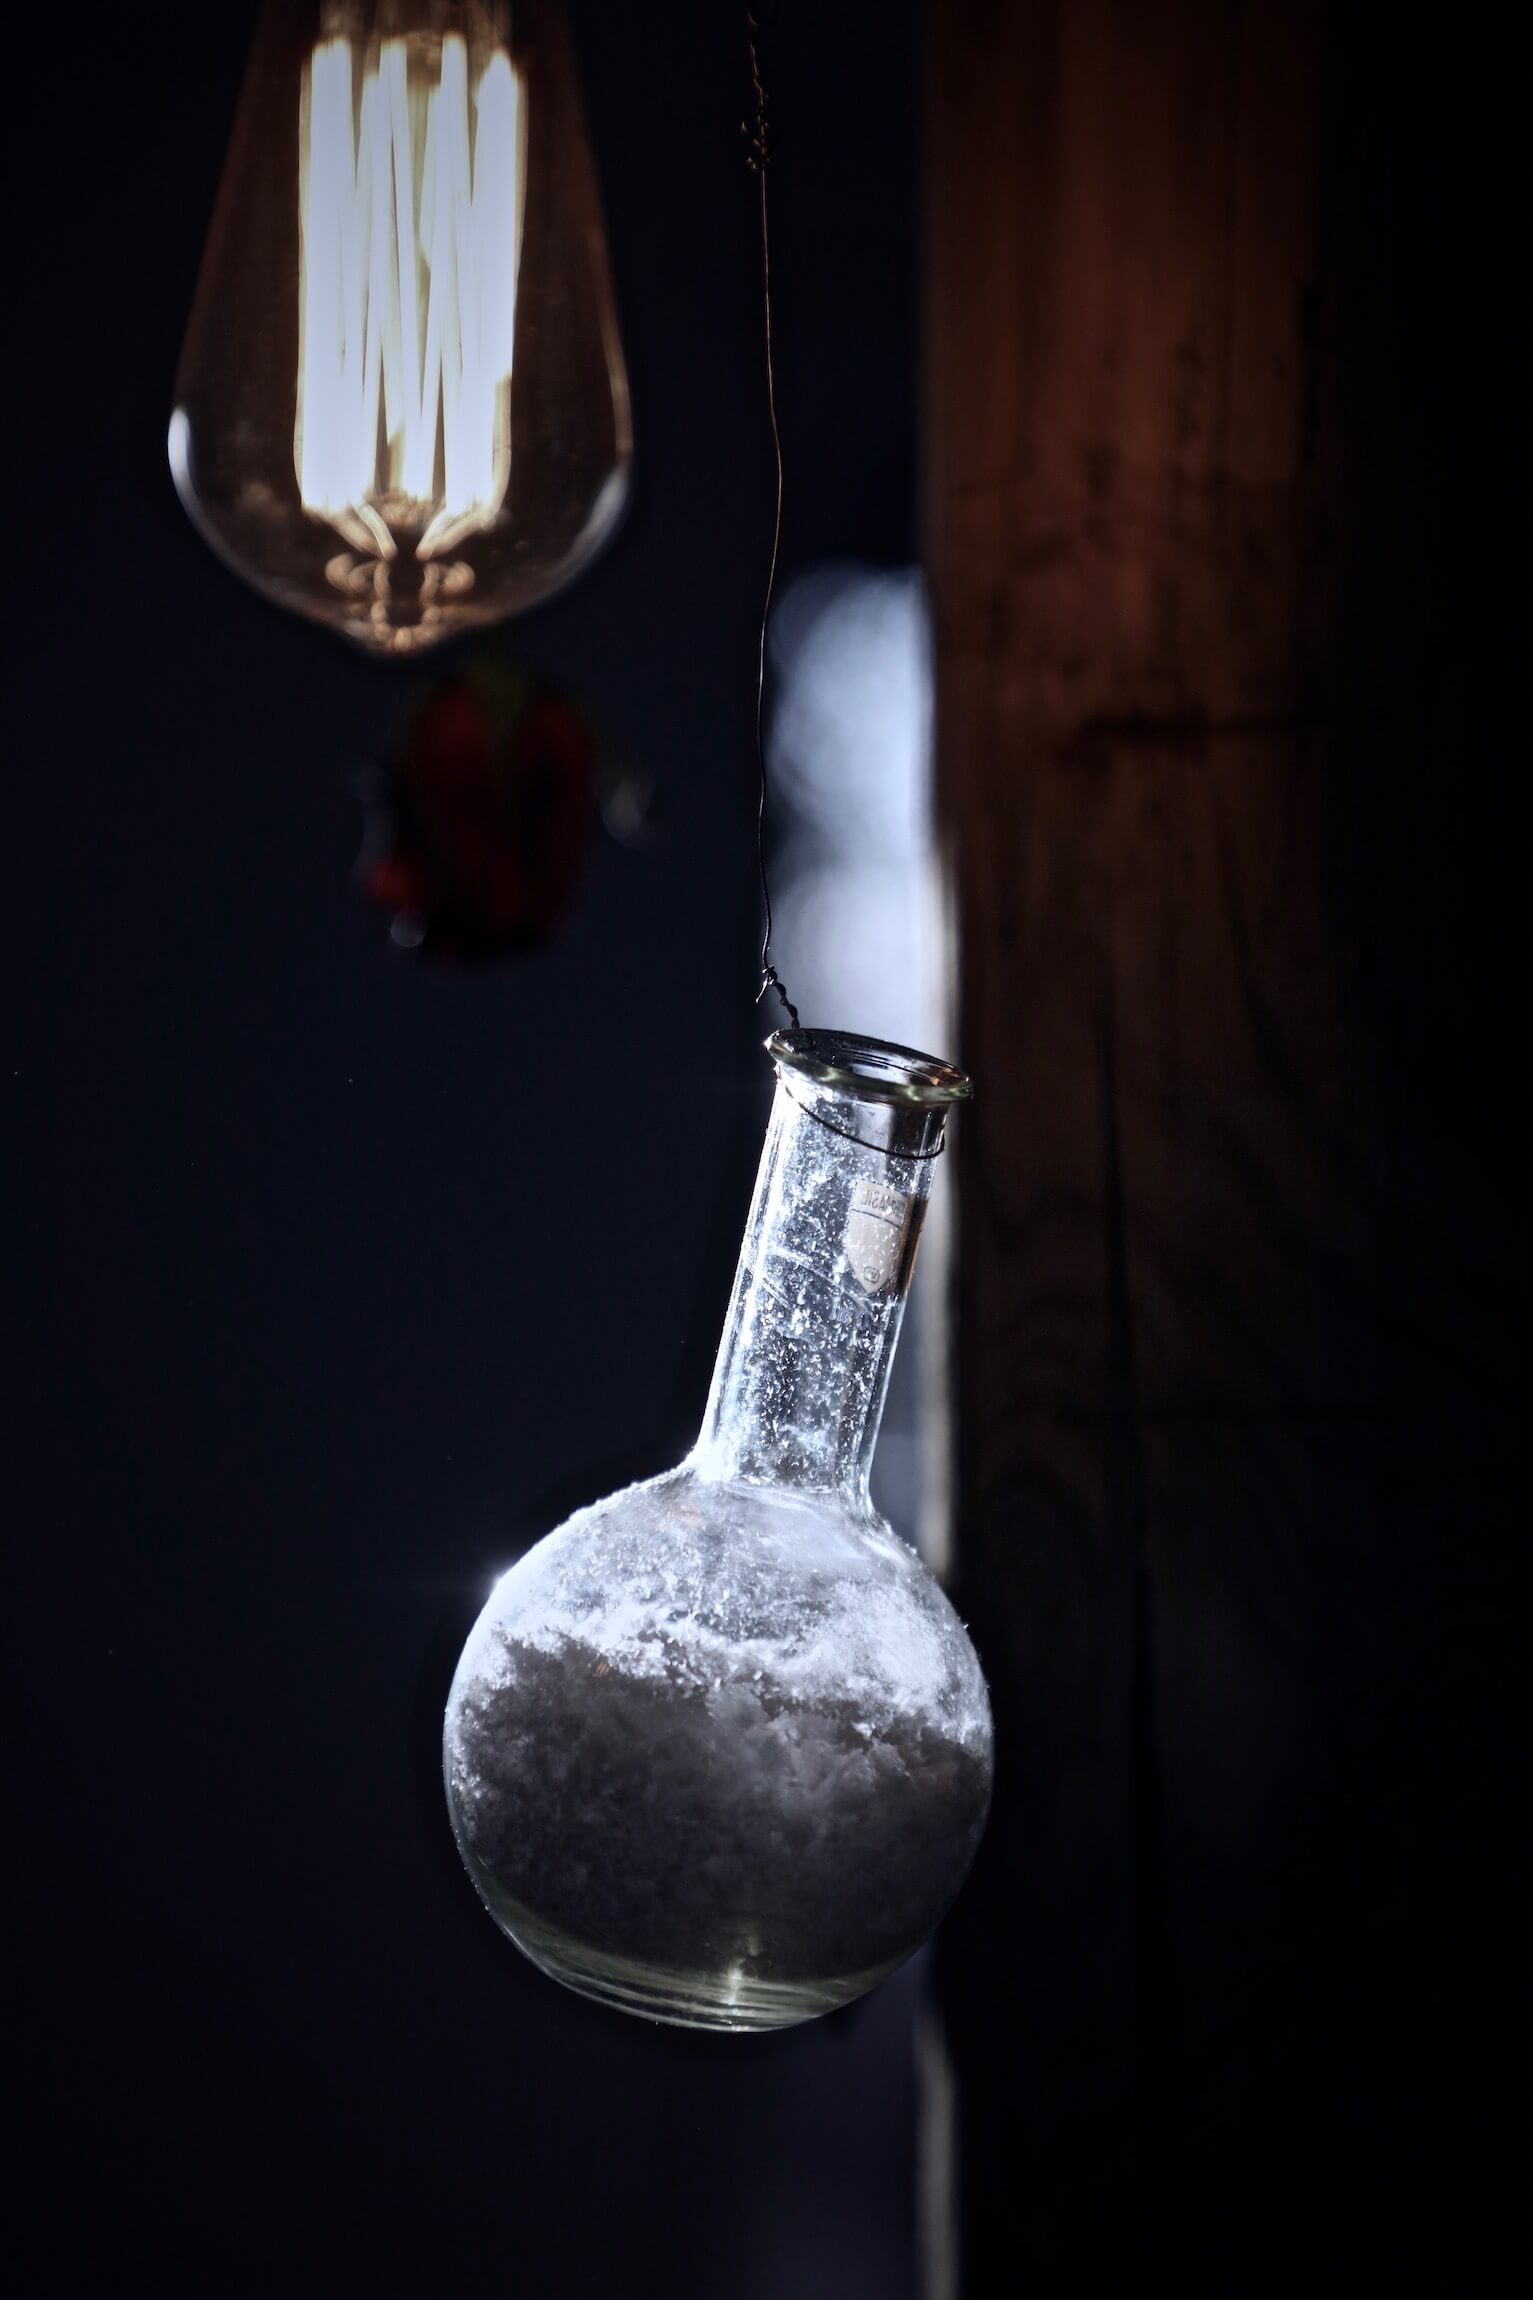 filament light bulb and test-tube of snow hanging